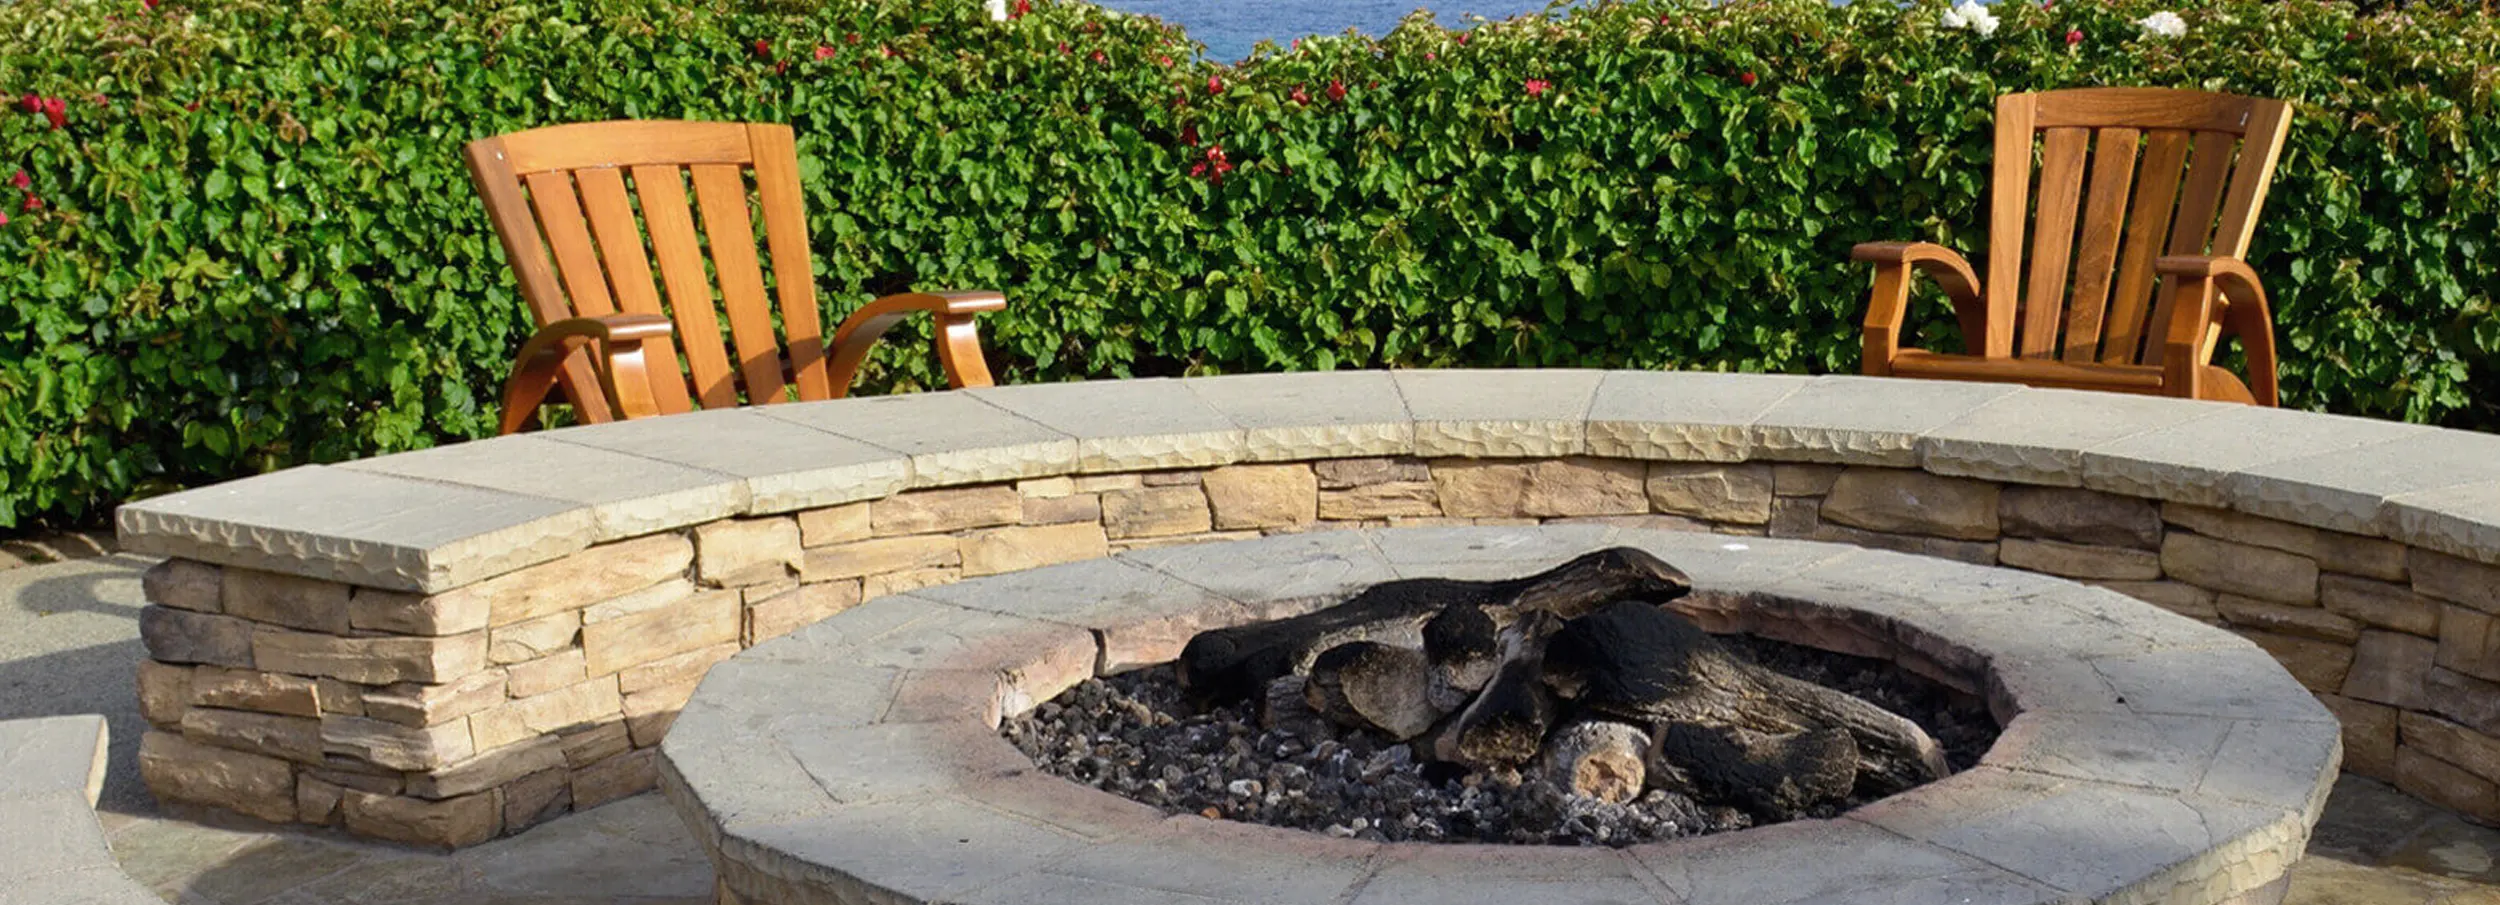 Stone firepit surrounded by low wall with pair of wooden patio chairs and hedge in background.